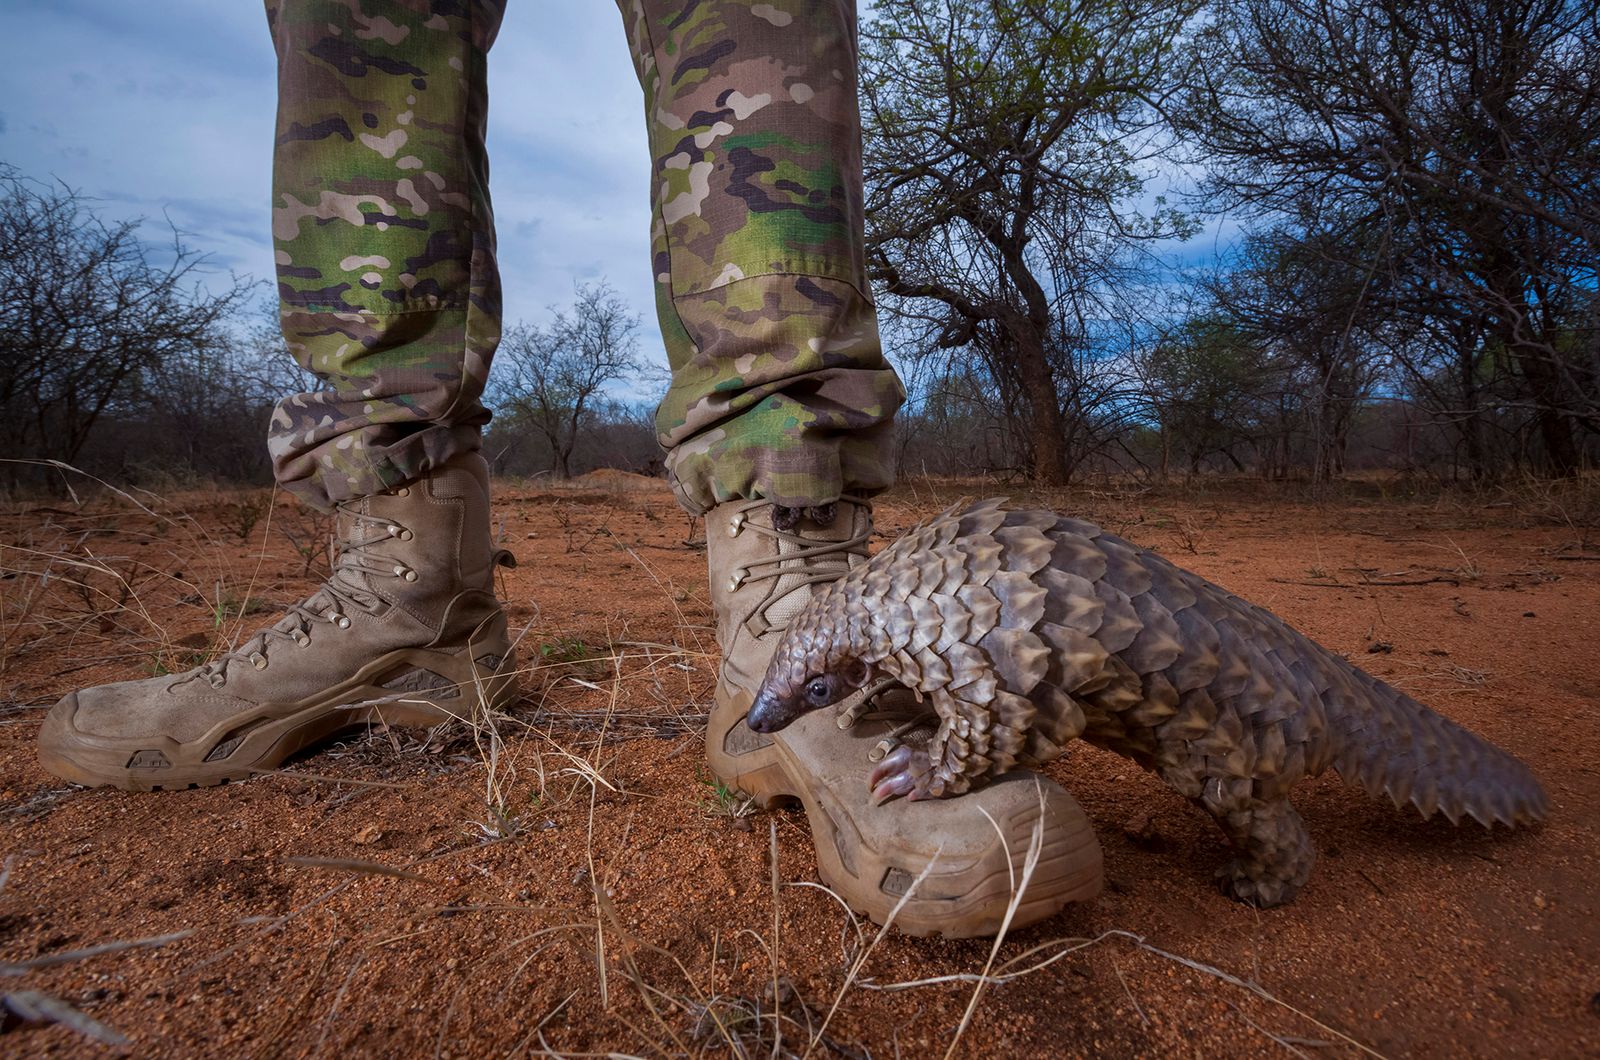 © Neil Aldridge - Image from the Pangolin Protectors photography project